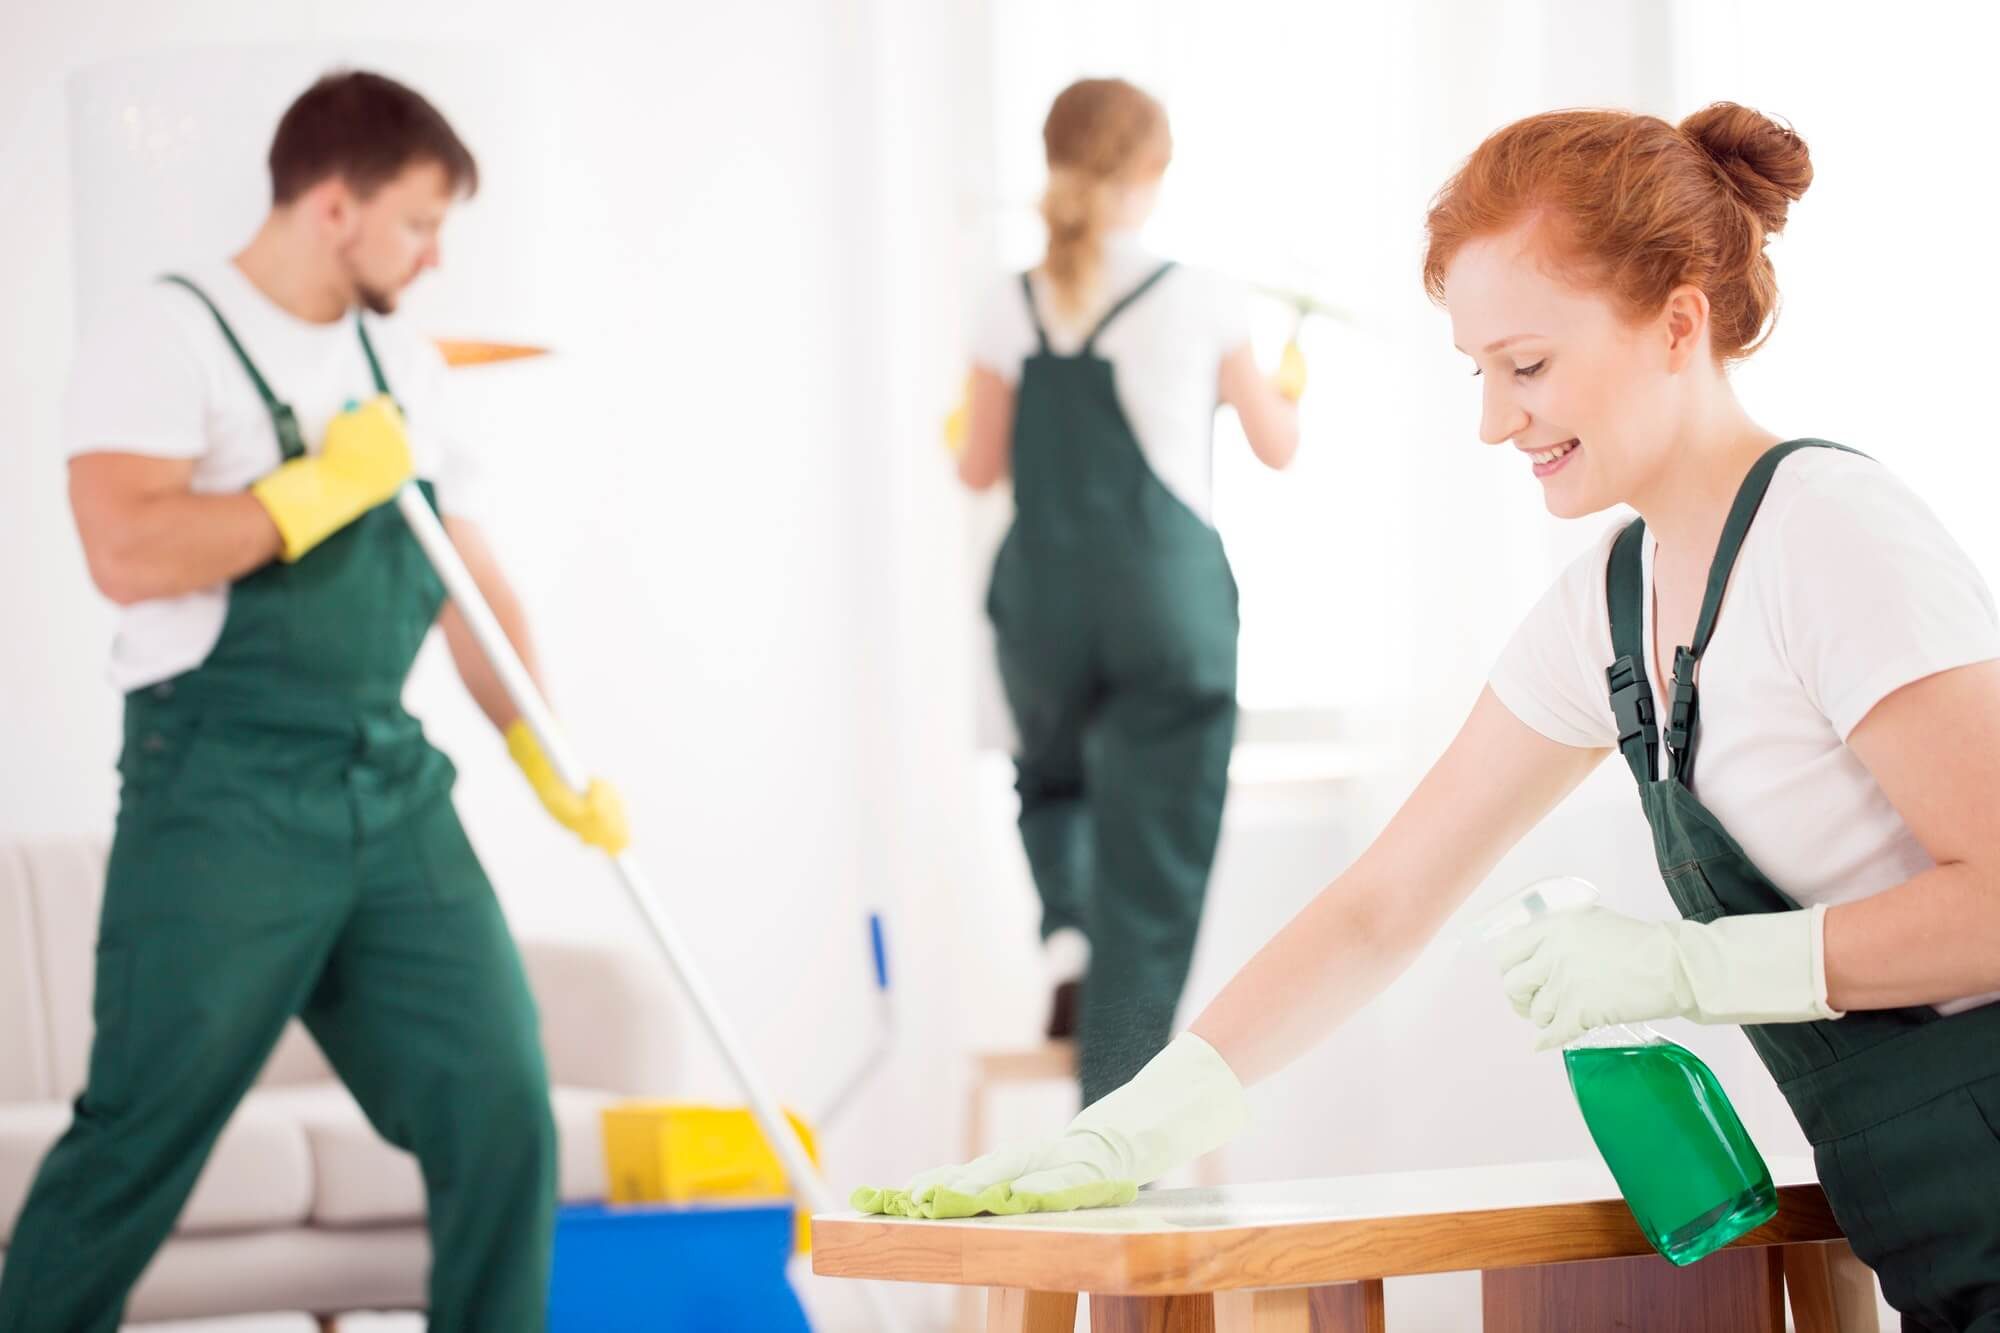 Benefits of outsourcing cleaning services for corporations and